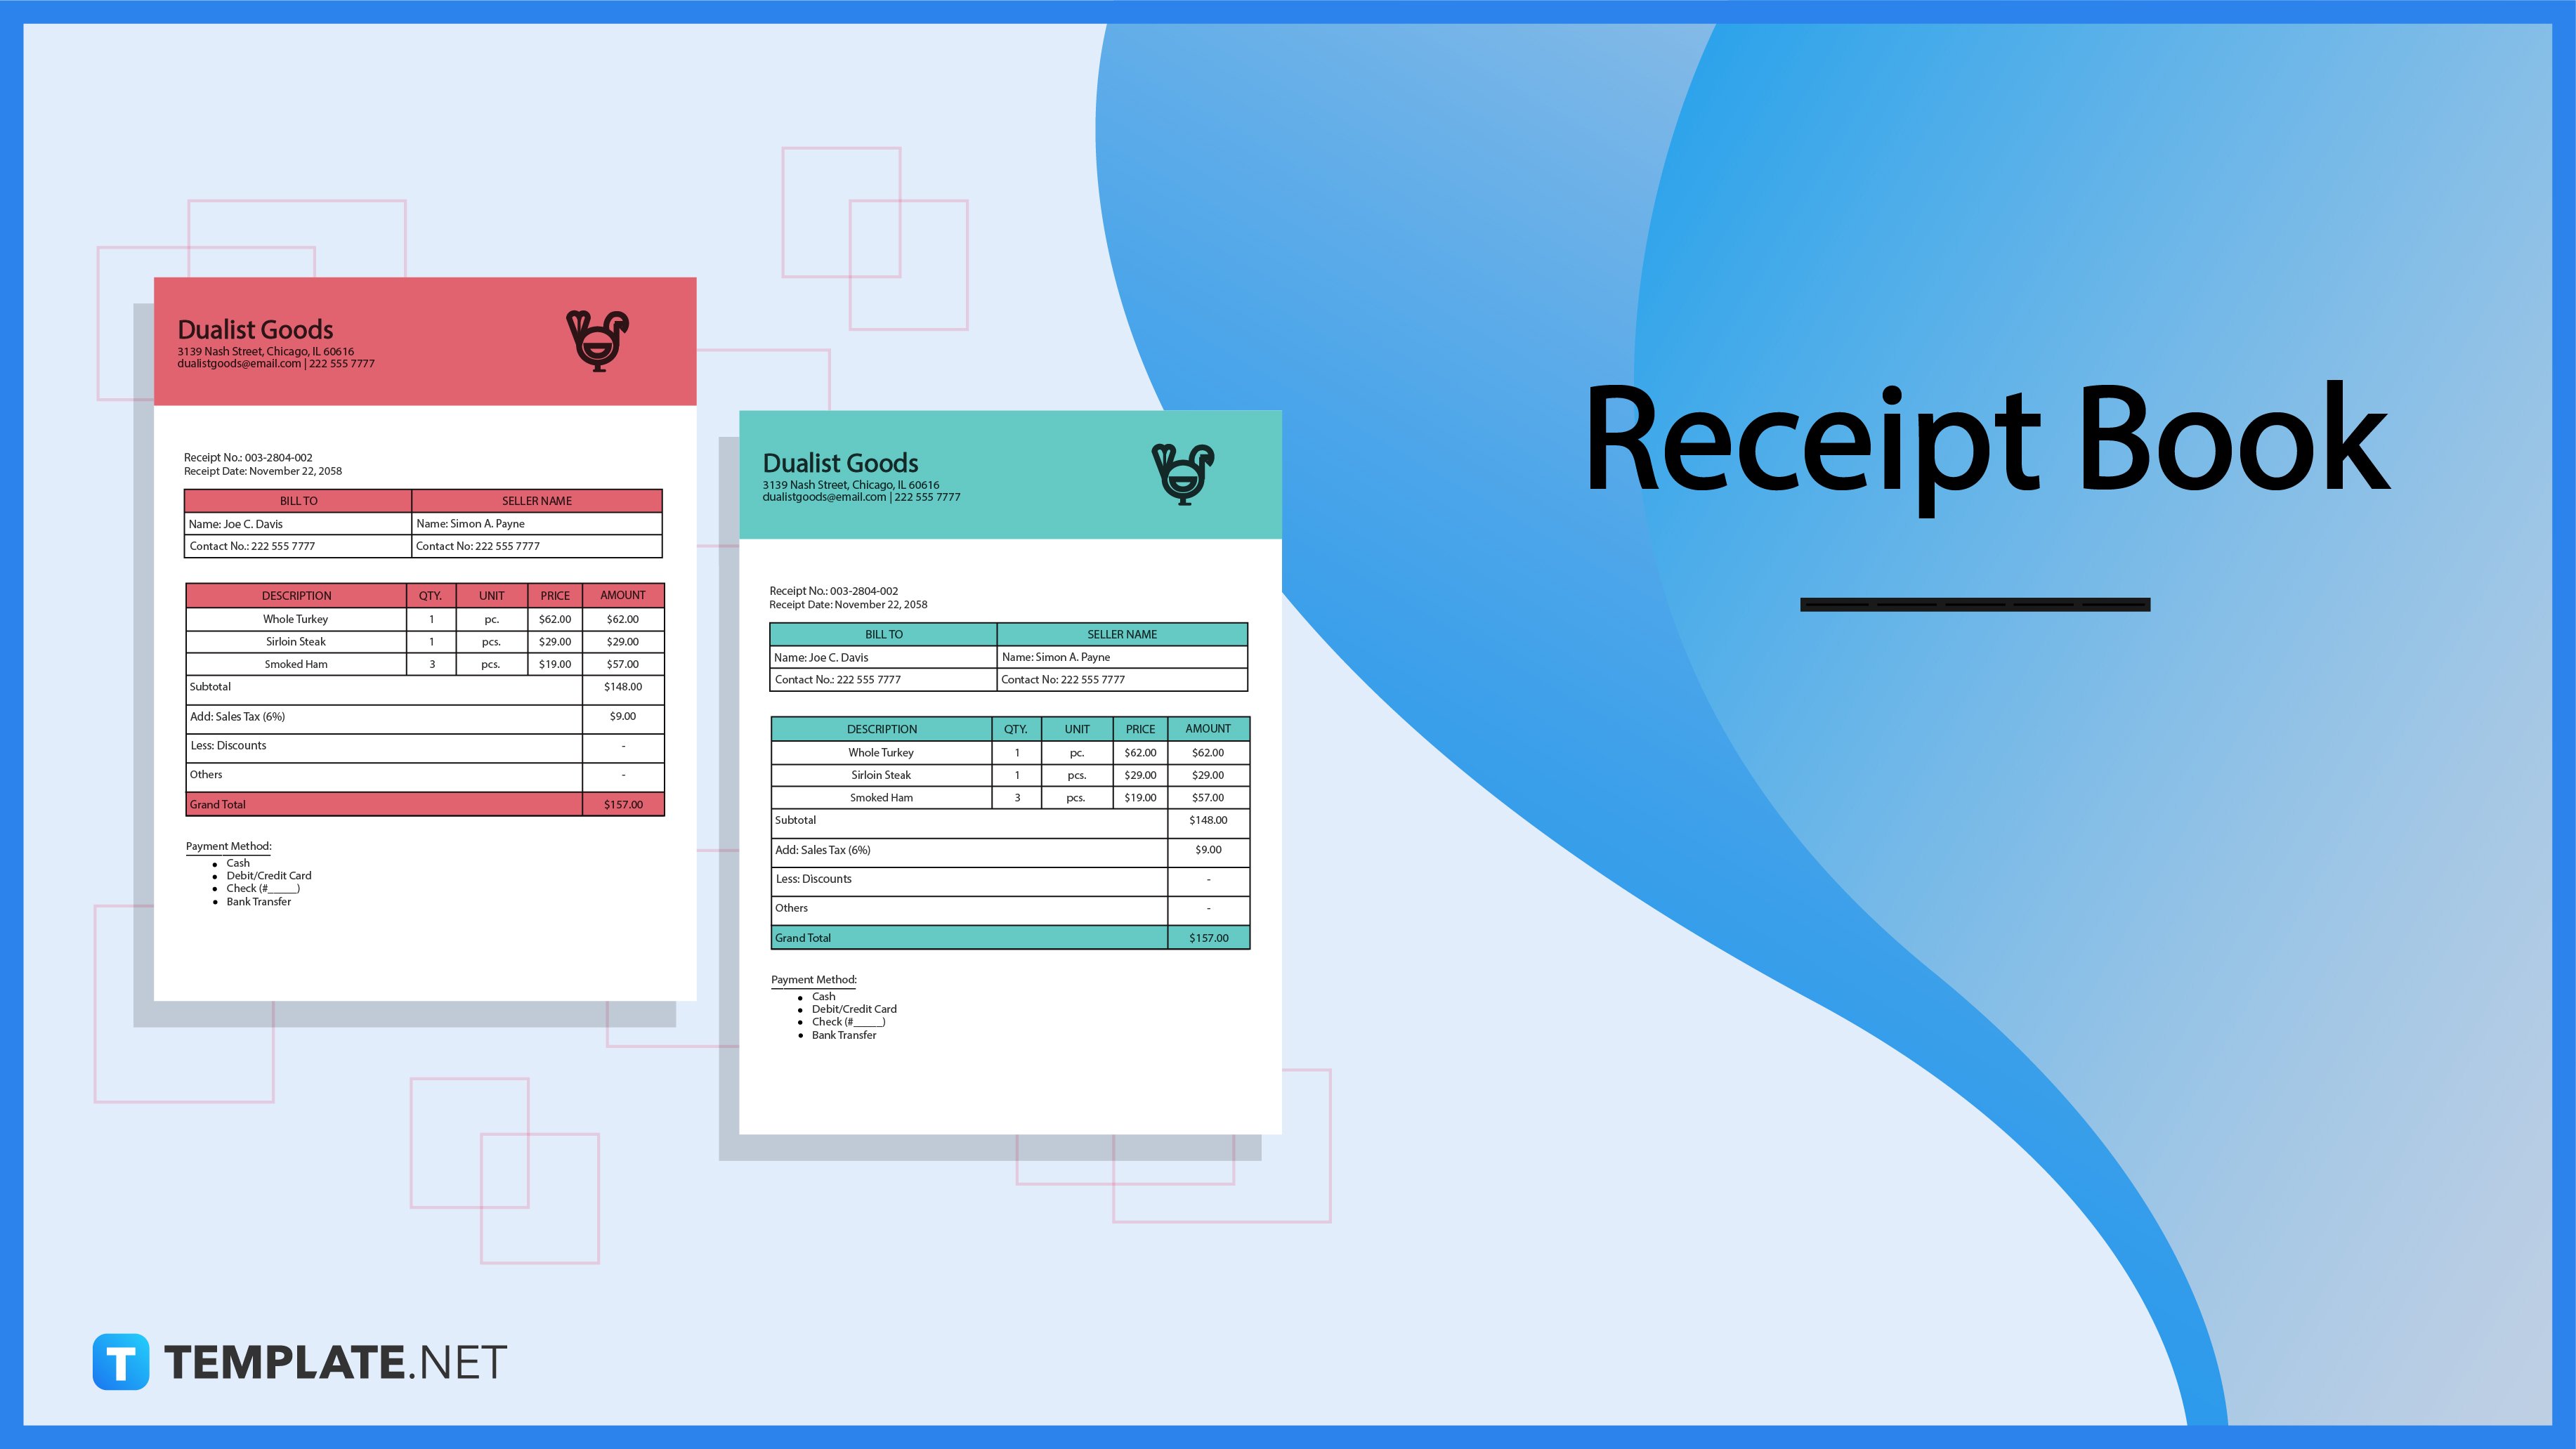 receipt-book-what-is-a-receipt-book-definition-types-uses